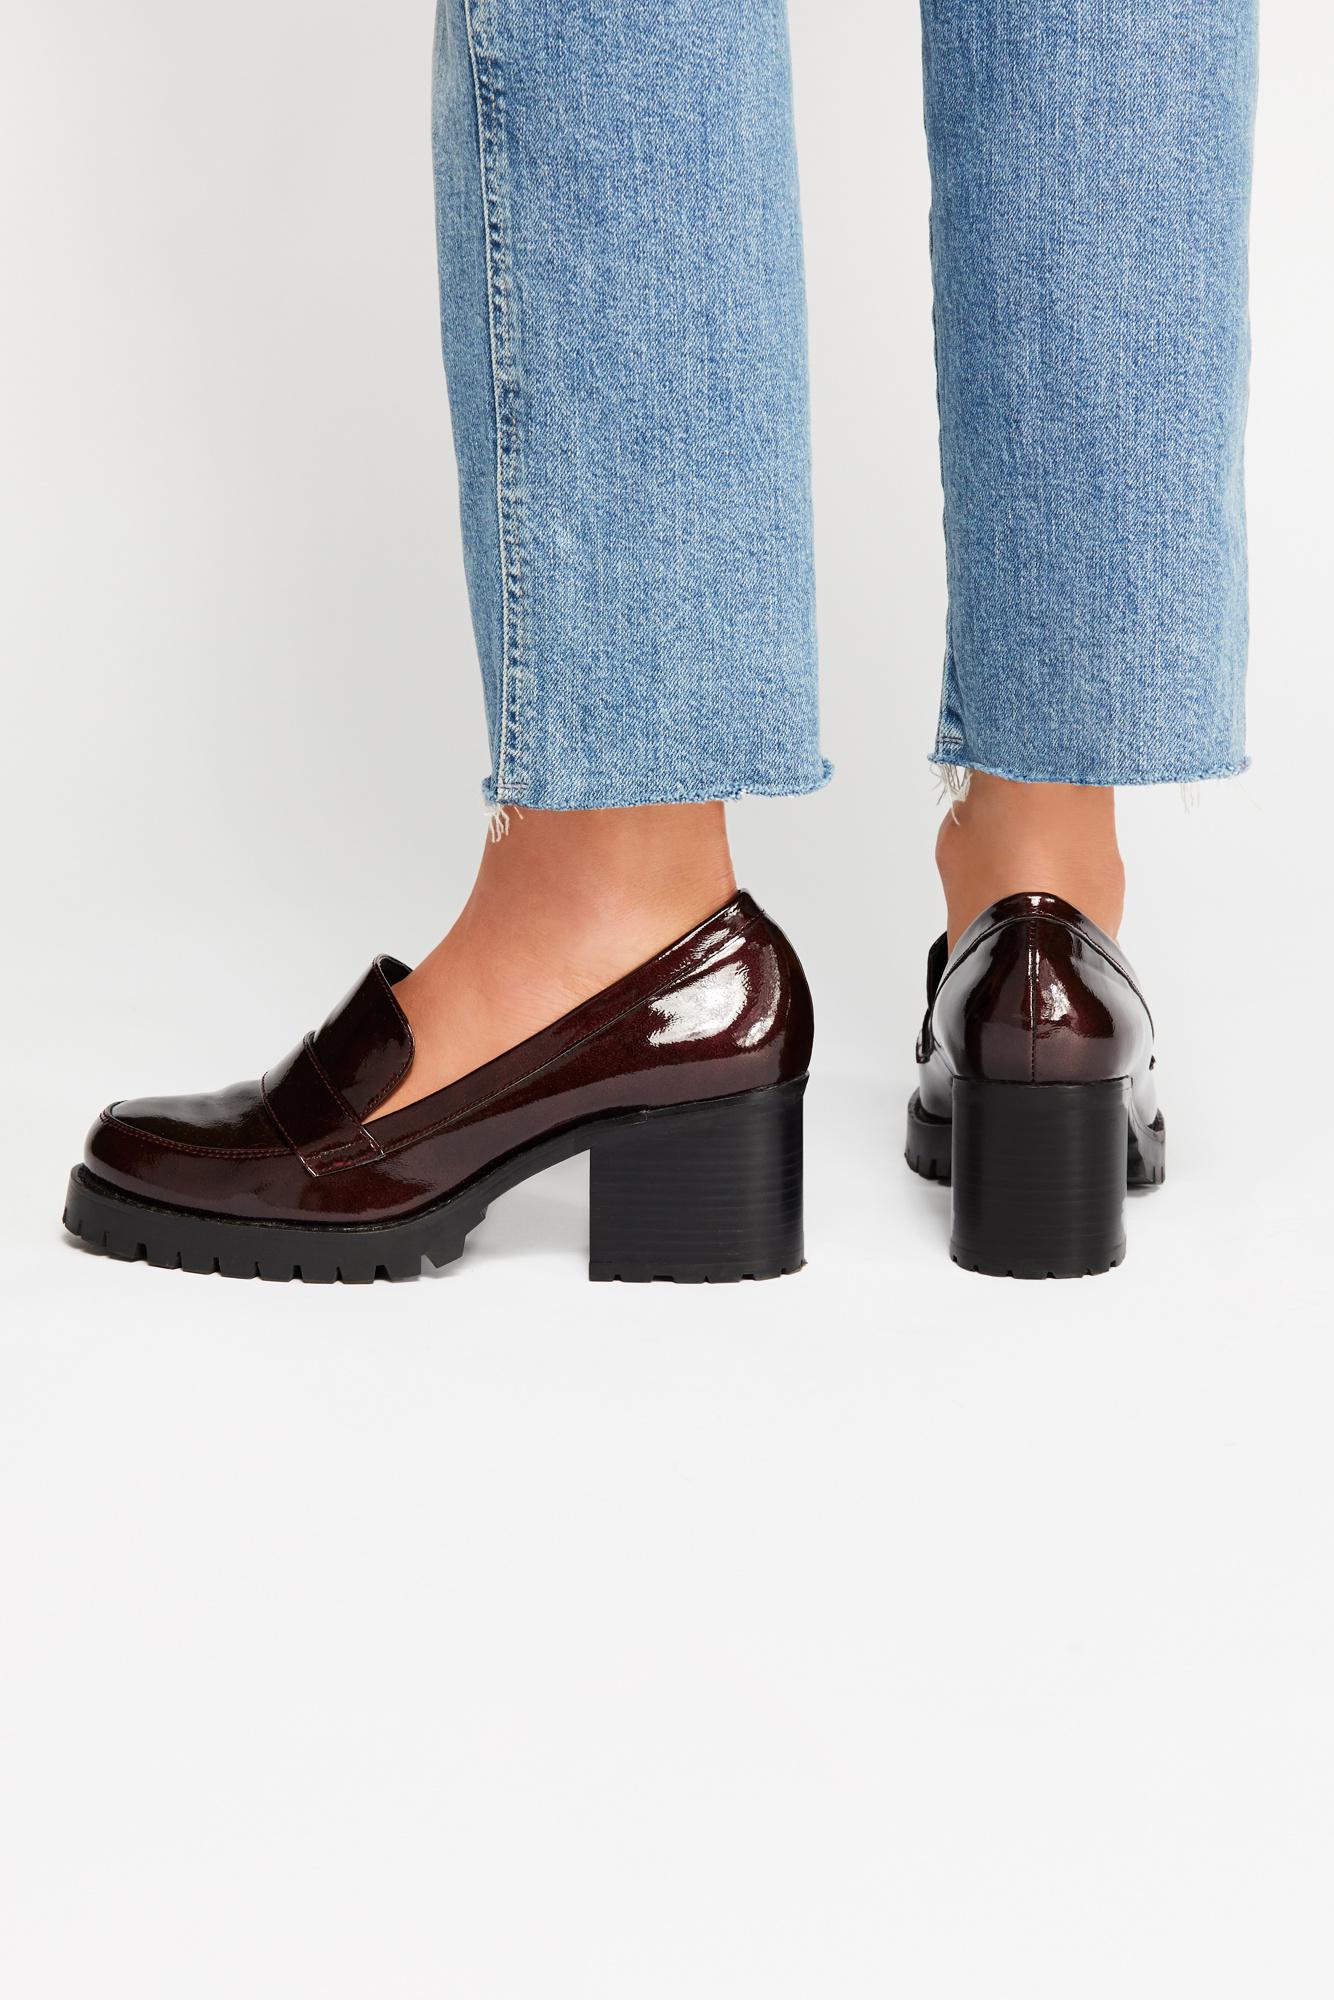 Free People Leather Lexden Block Heel Loafer By Jane And The Shoe in ...